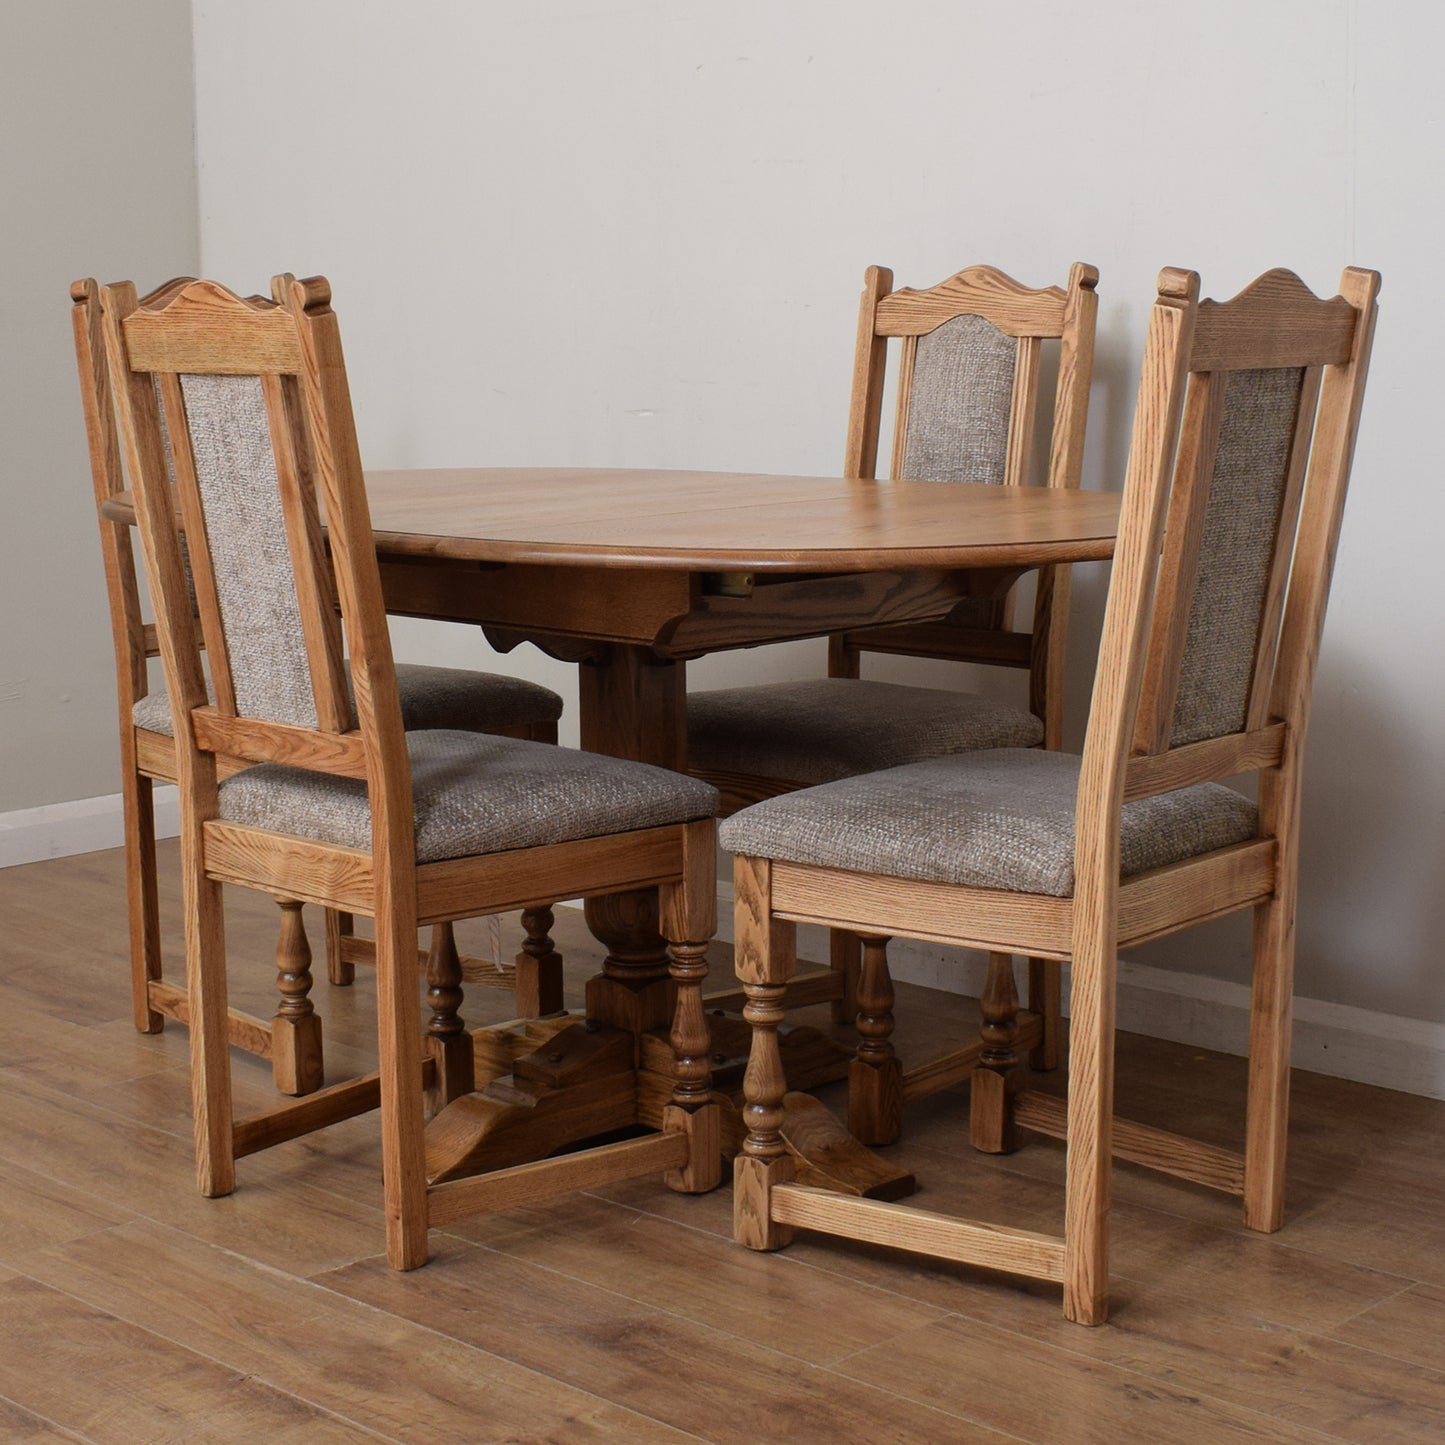 Restored Old Charm Table And Four Chairs